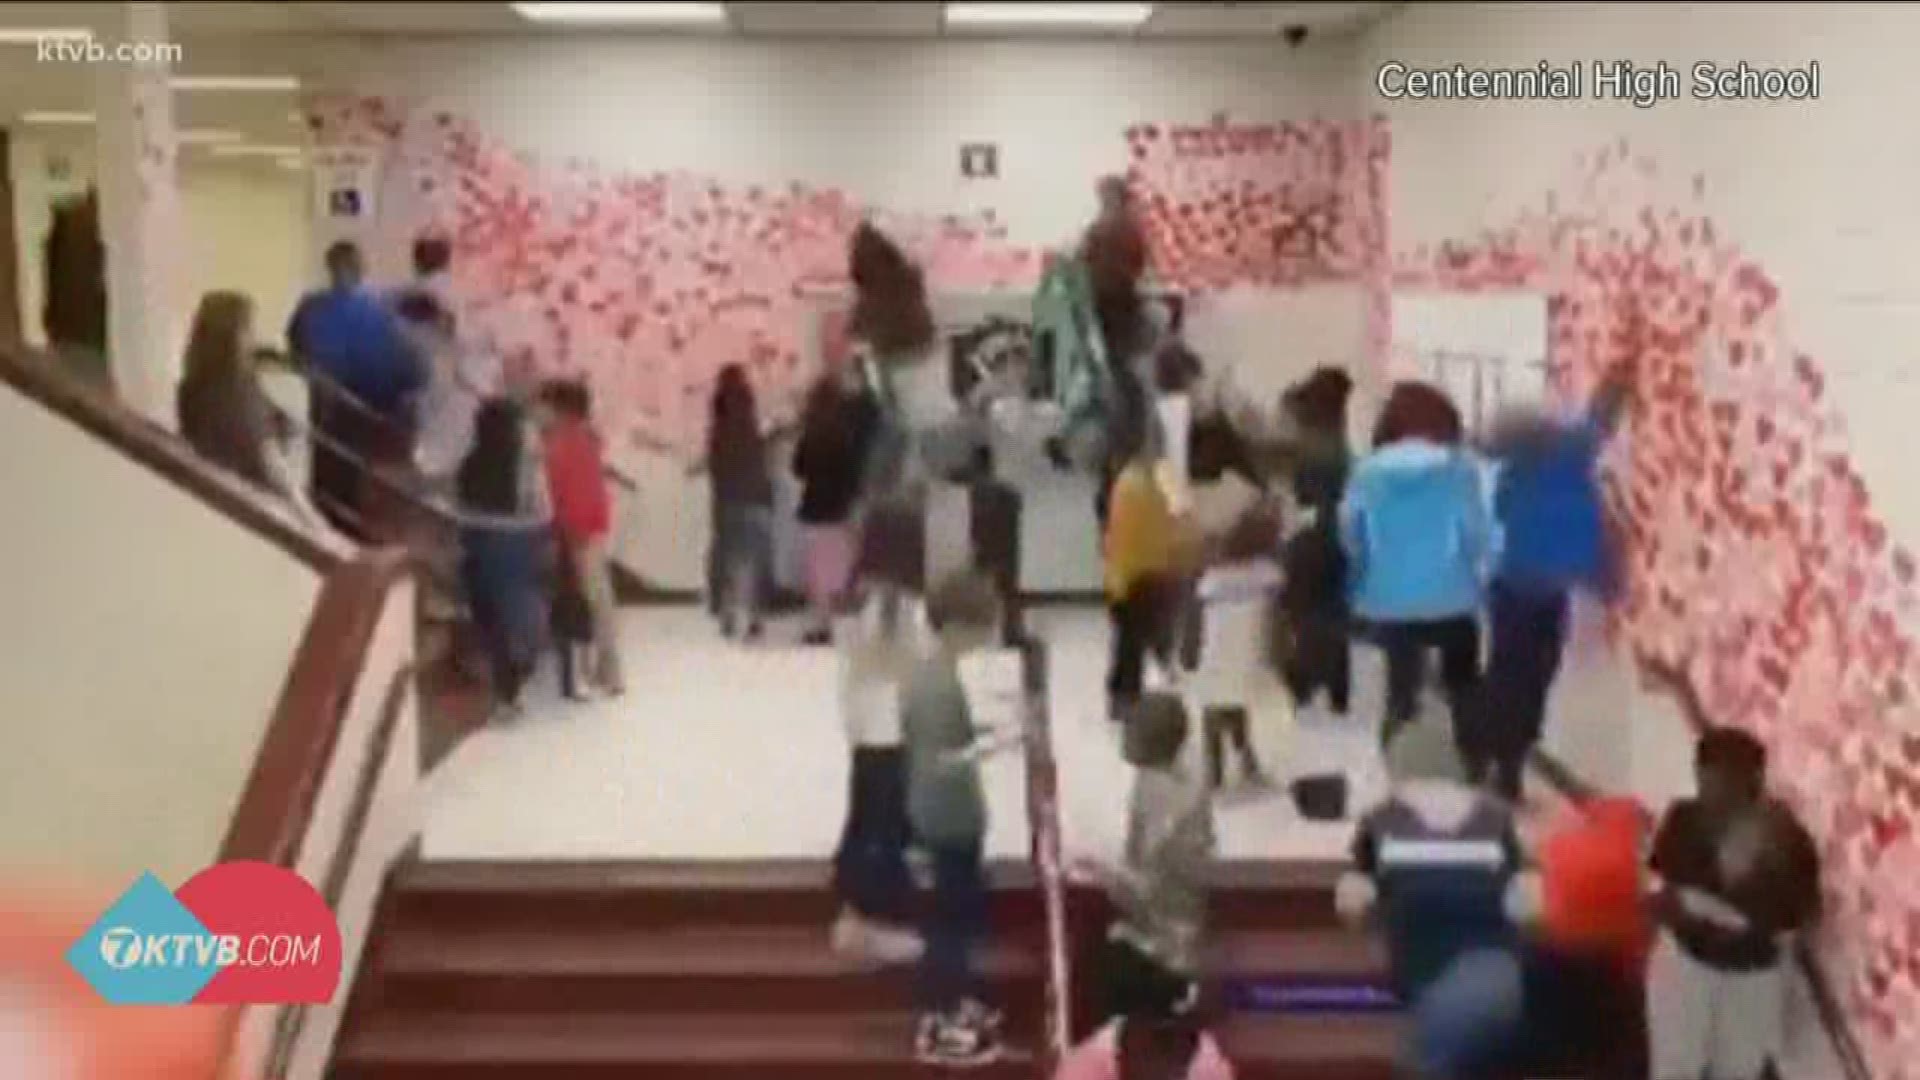 Valentine's Day is a week away, but students at Centennial High School are getting a step ahead of the holiday with their own unique tradition.